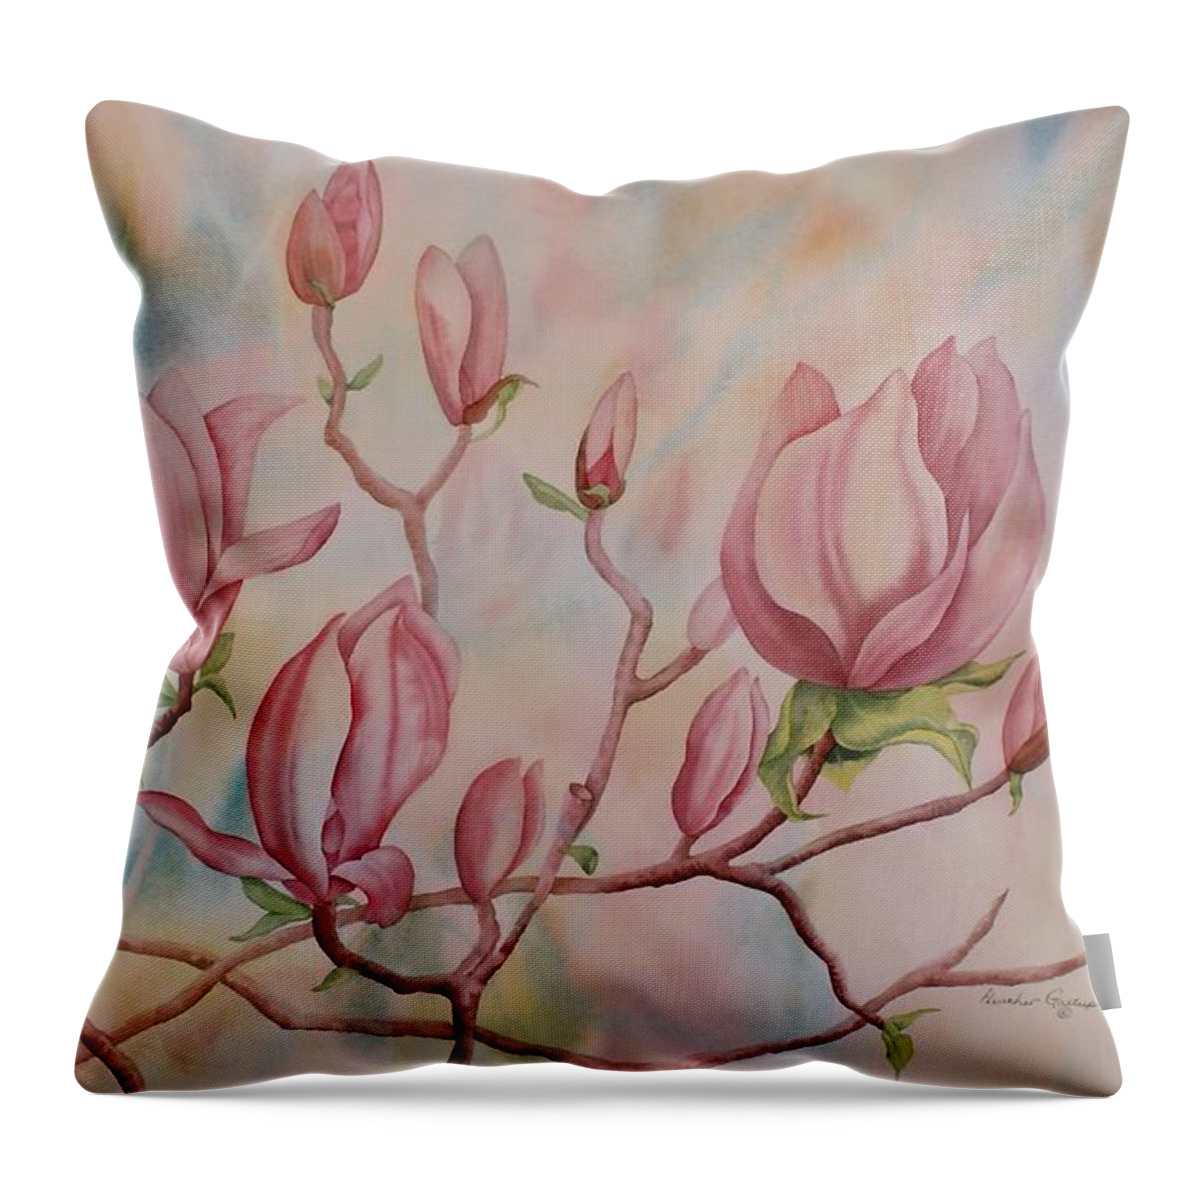 Magnolia Throw Pillow featuring the painting Magnolia by Heather Gallup